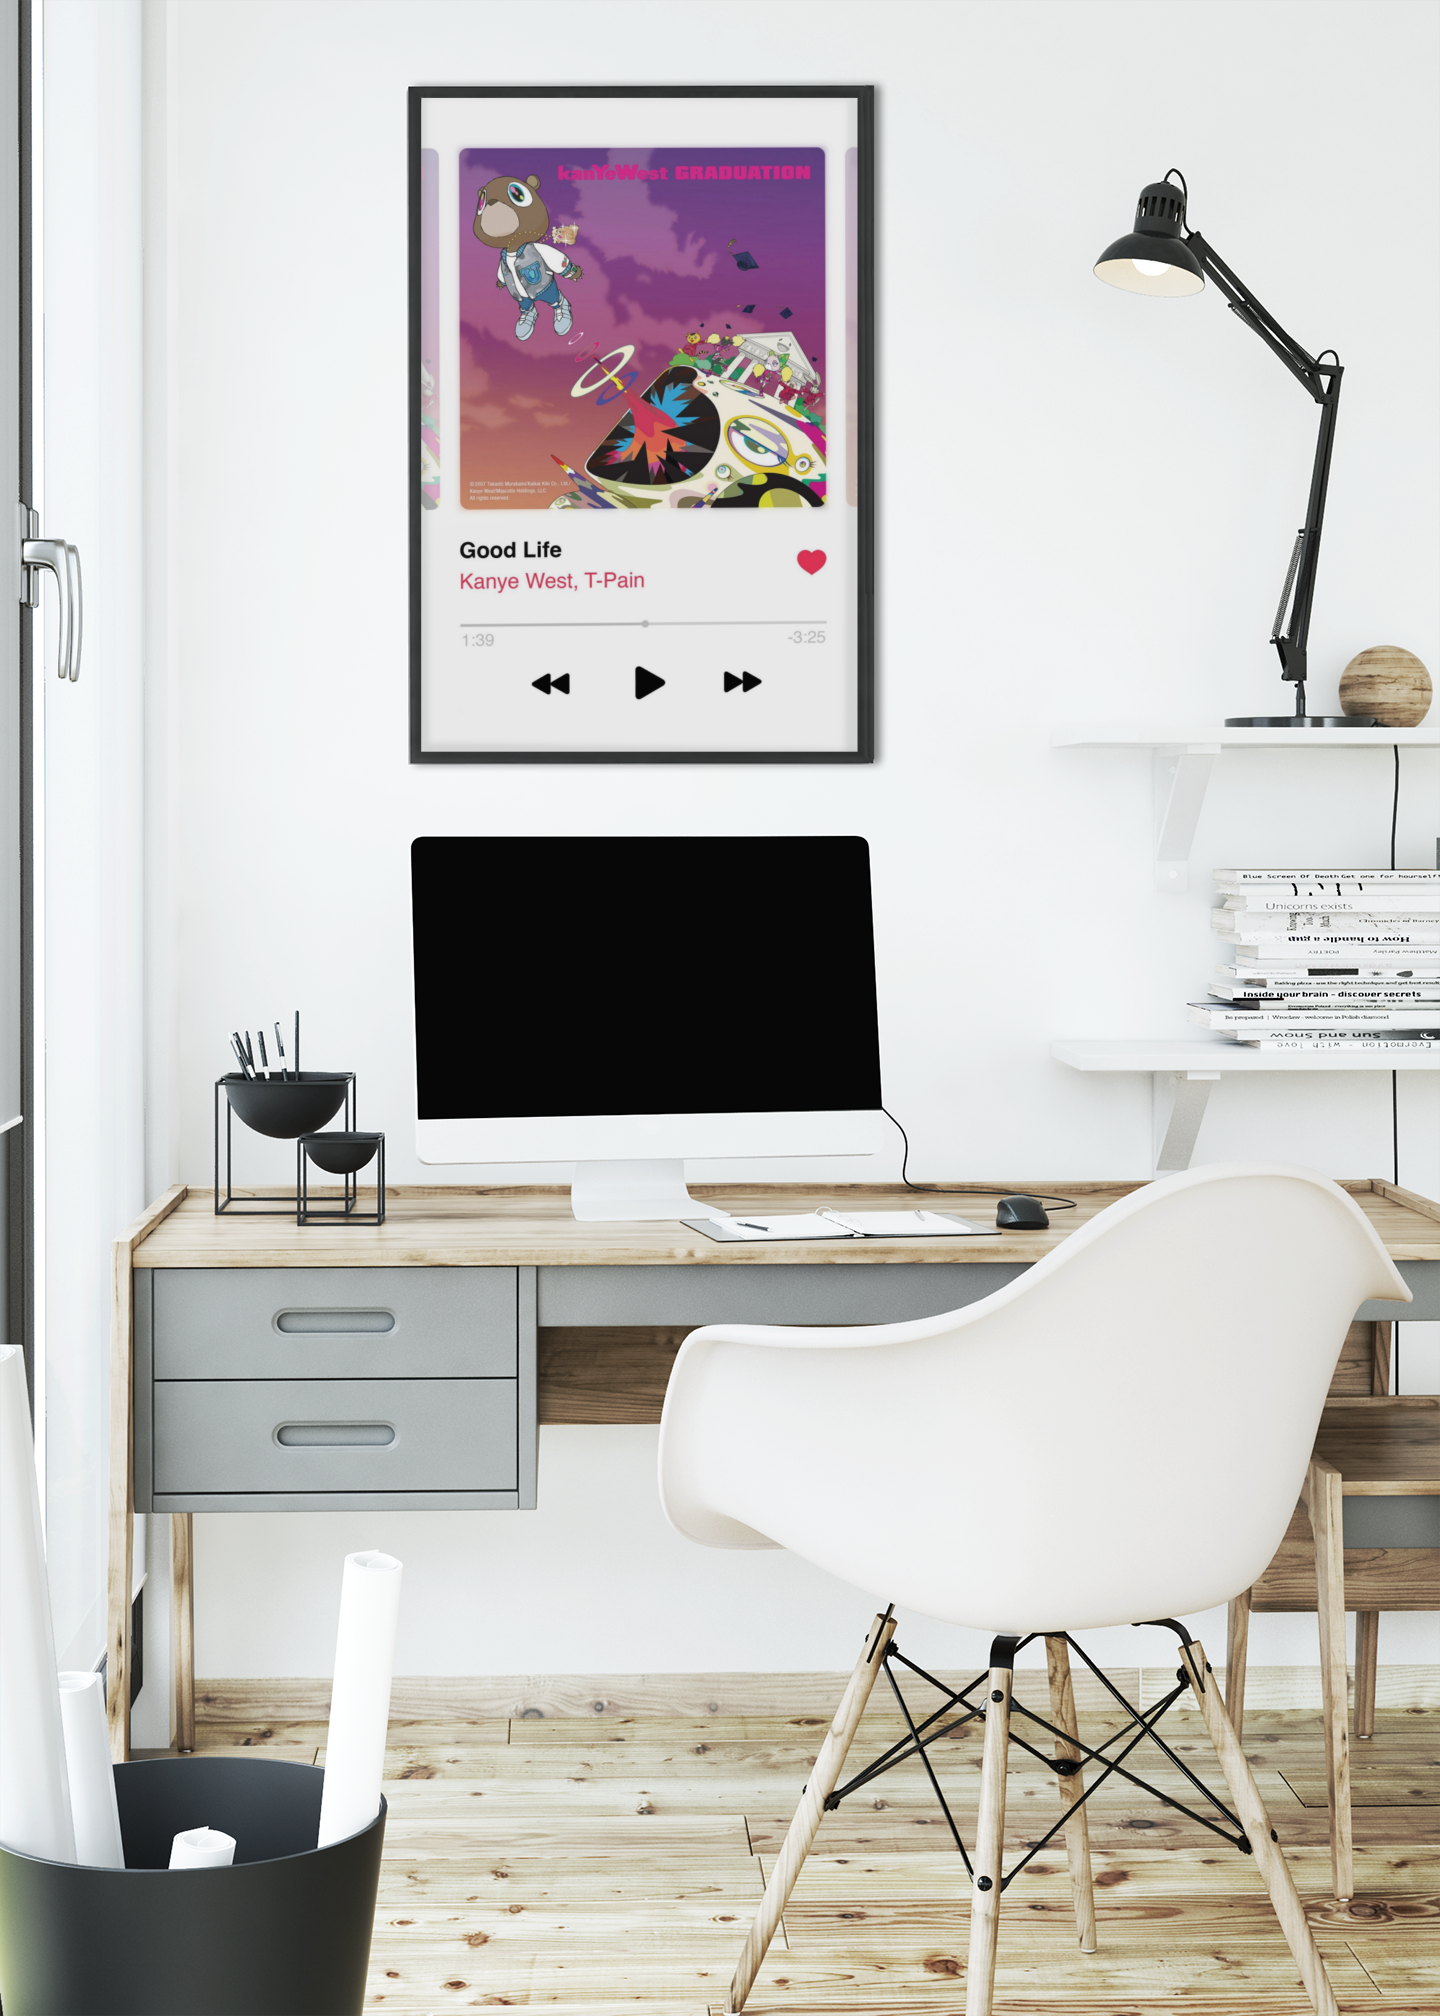 Good Life Kanye West T-Pain Music Player Album Poster